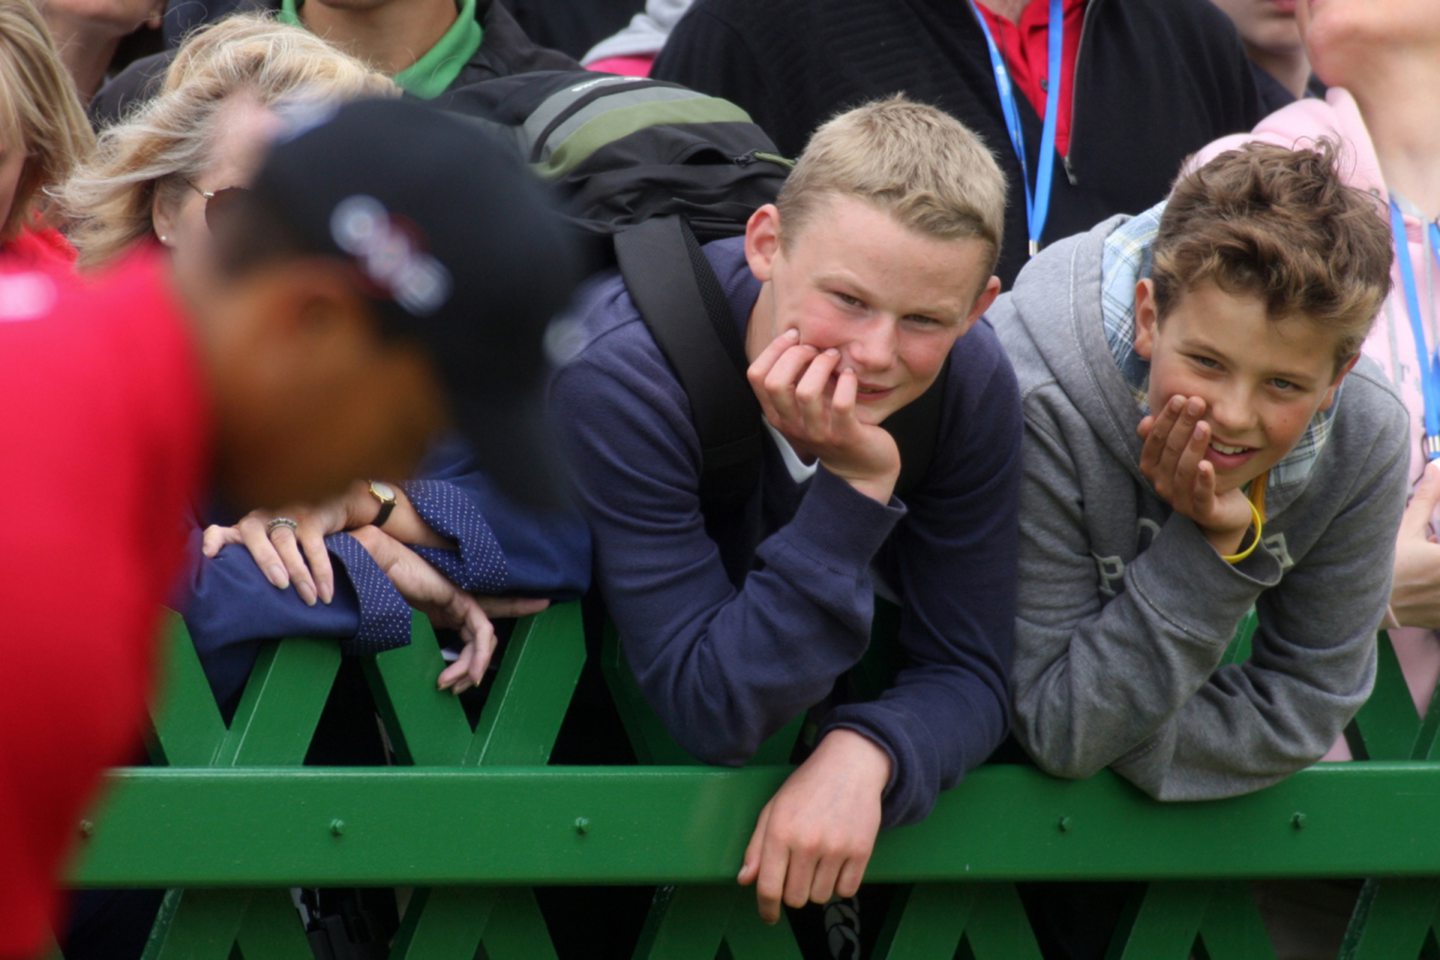 Kids in St Andrews watching Tiger Woods play golf.